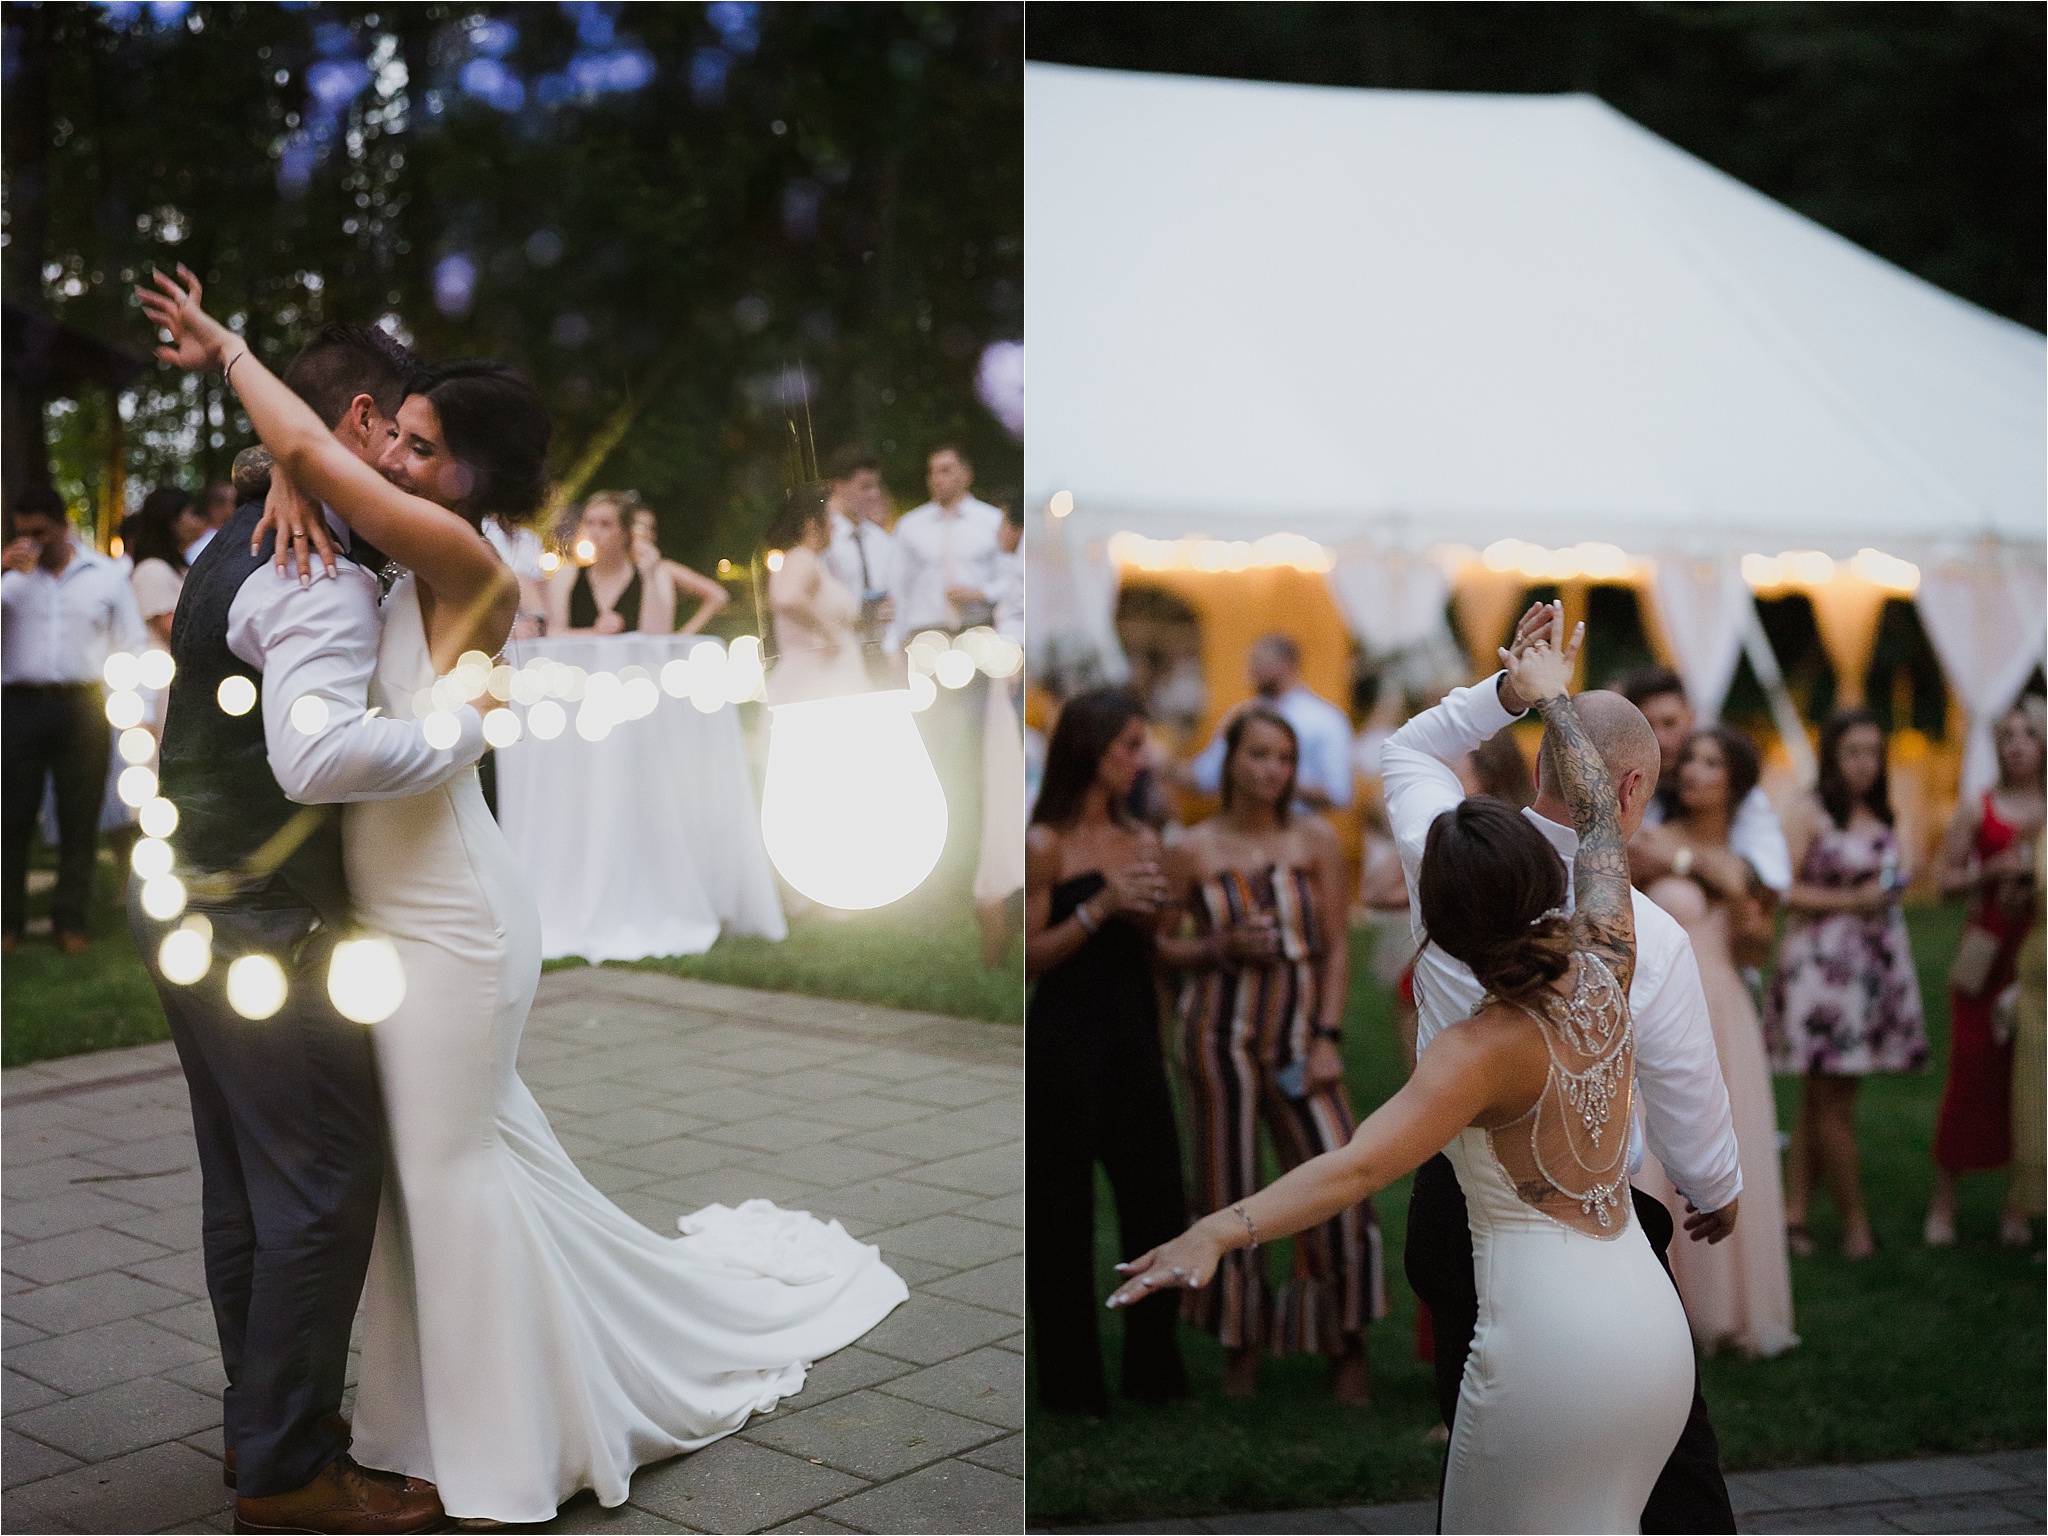 Sonia V Photography, The Clearing reception wedding venue, first dance with bride and groom and bride and father